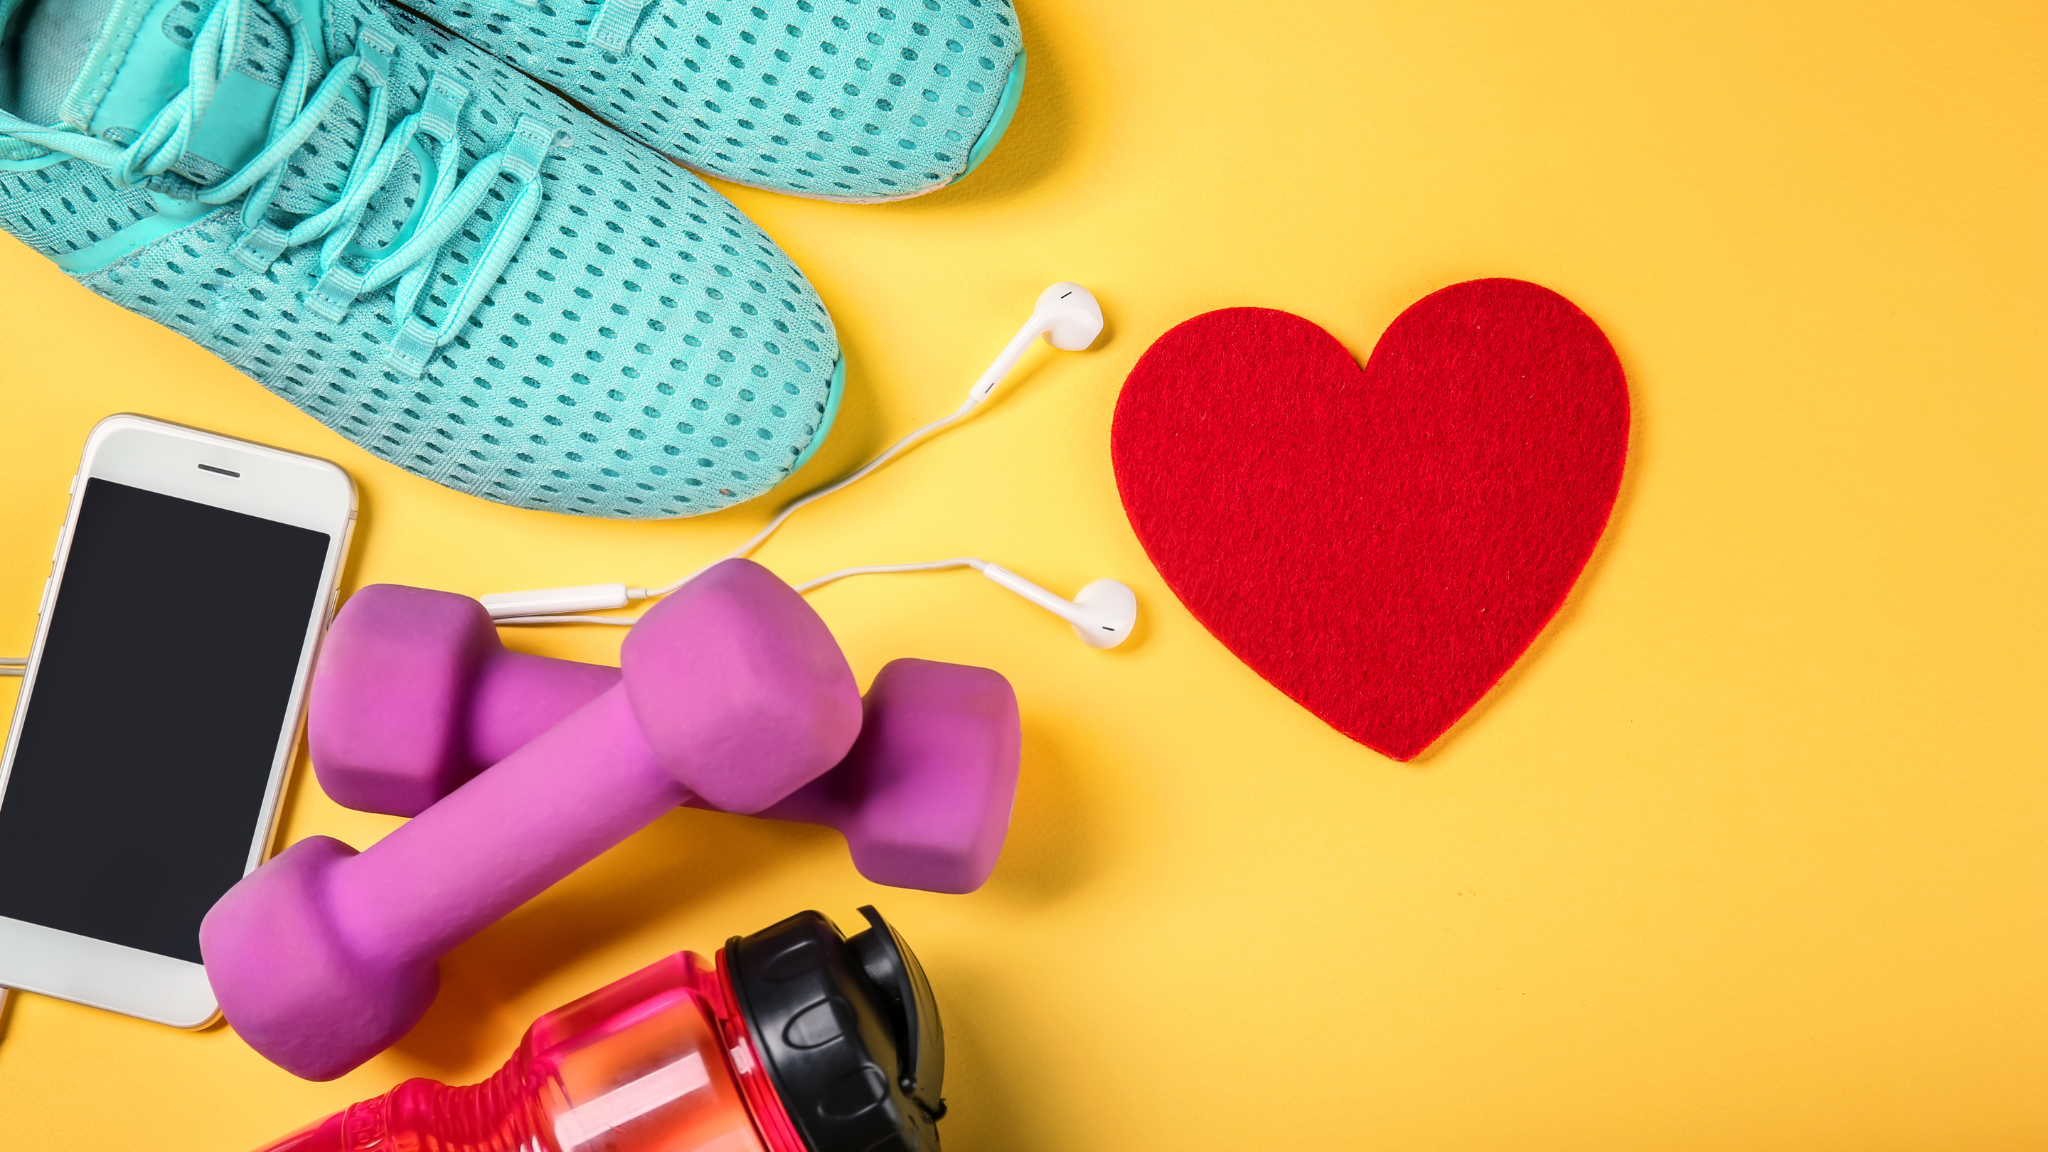 20 Cardio Exercises with Minimal Equipment: Tips to Try at Home and the Best Heart Rate for Cardio Workout Sessions